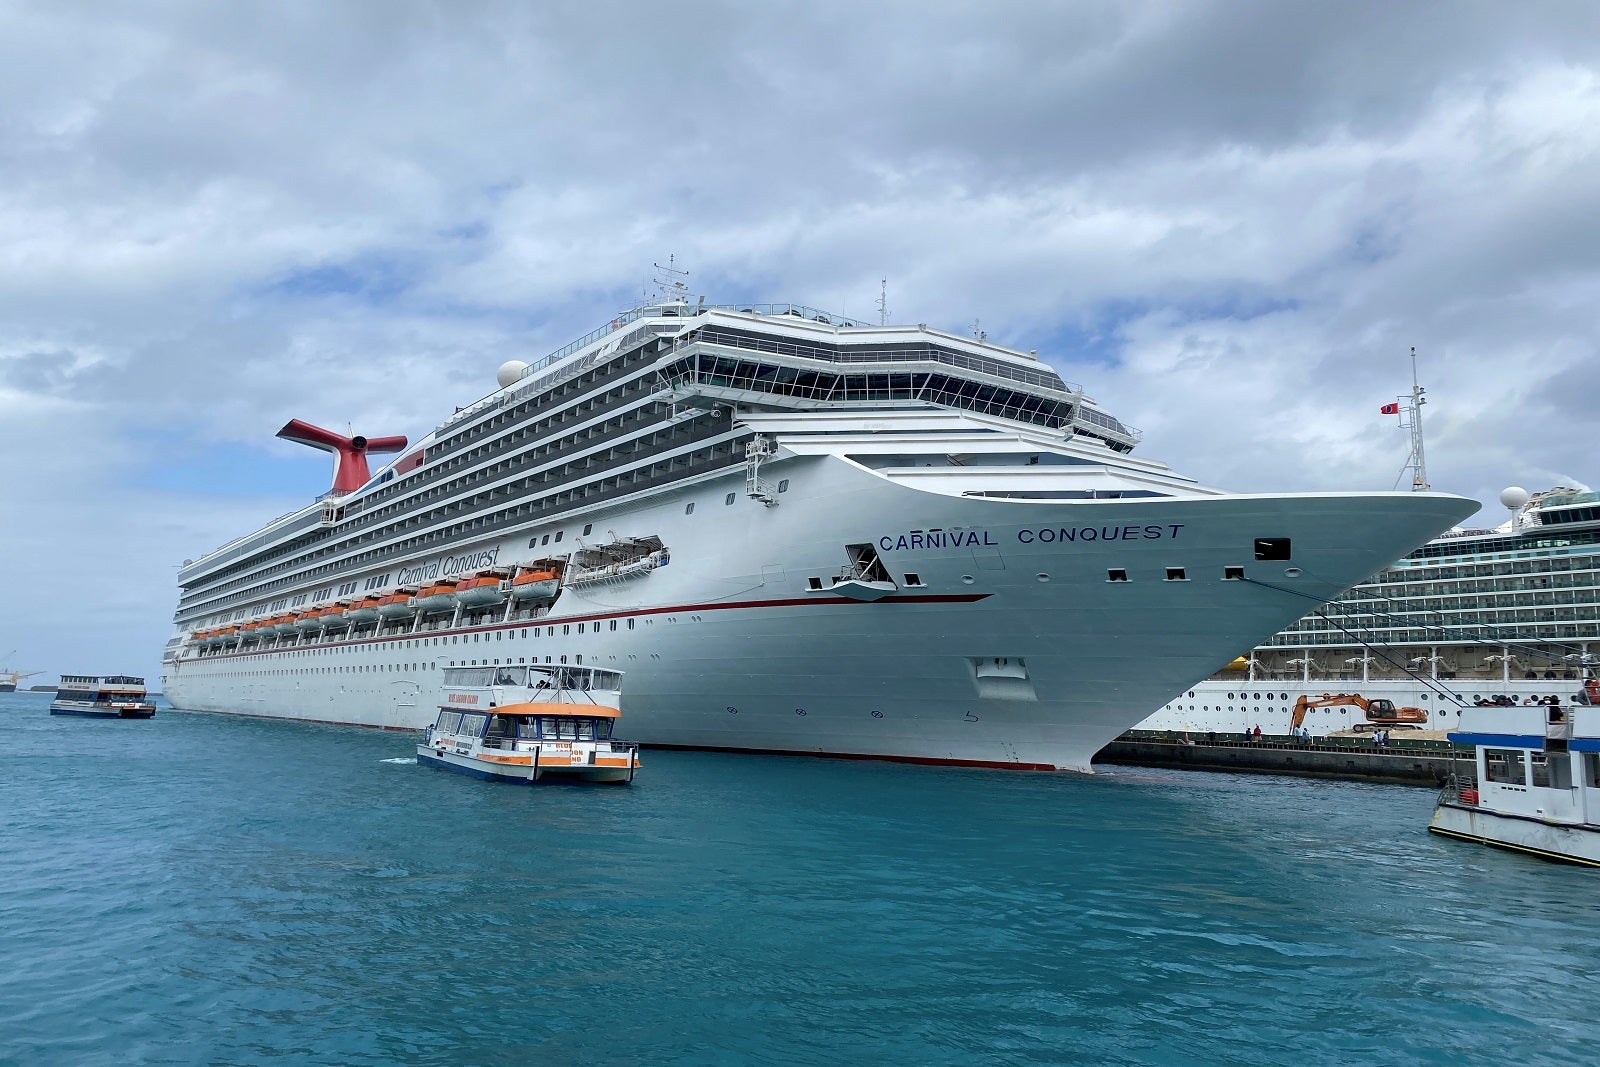 Carnival Conquest docked in Nassau, Bahamas